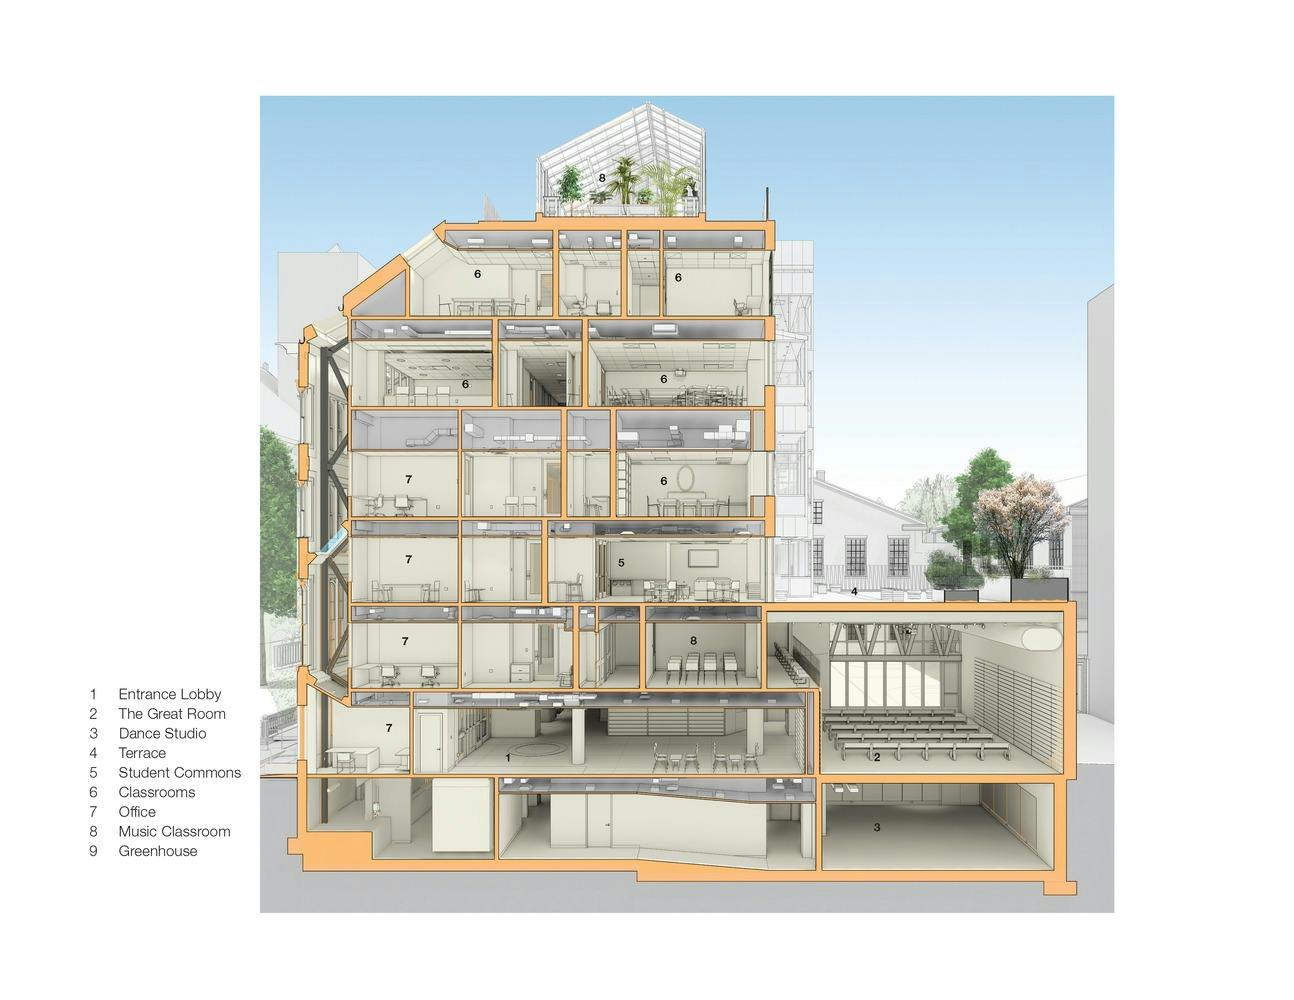 sectional perspective of modern schhool design remodel of historic building